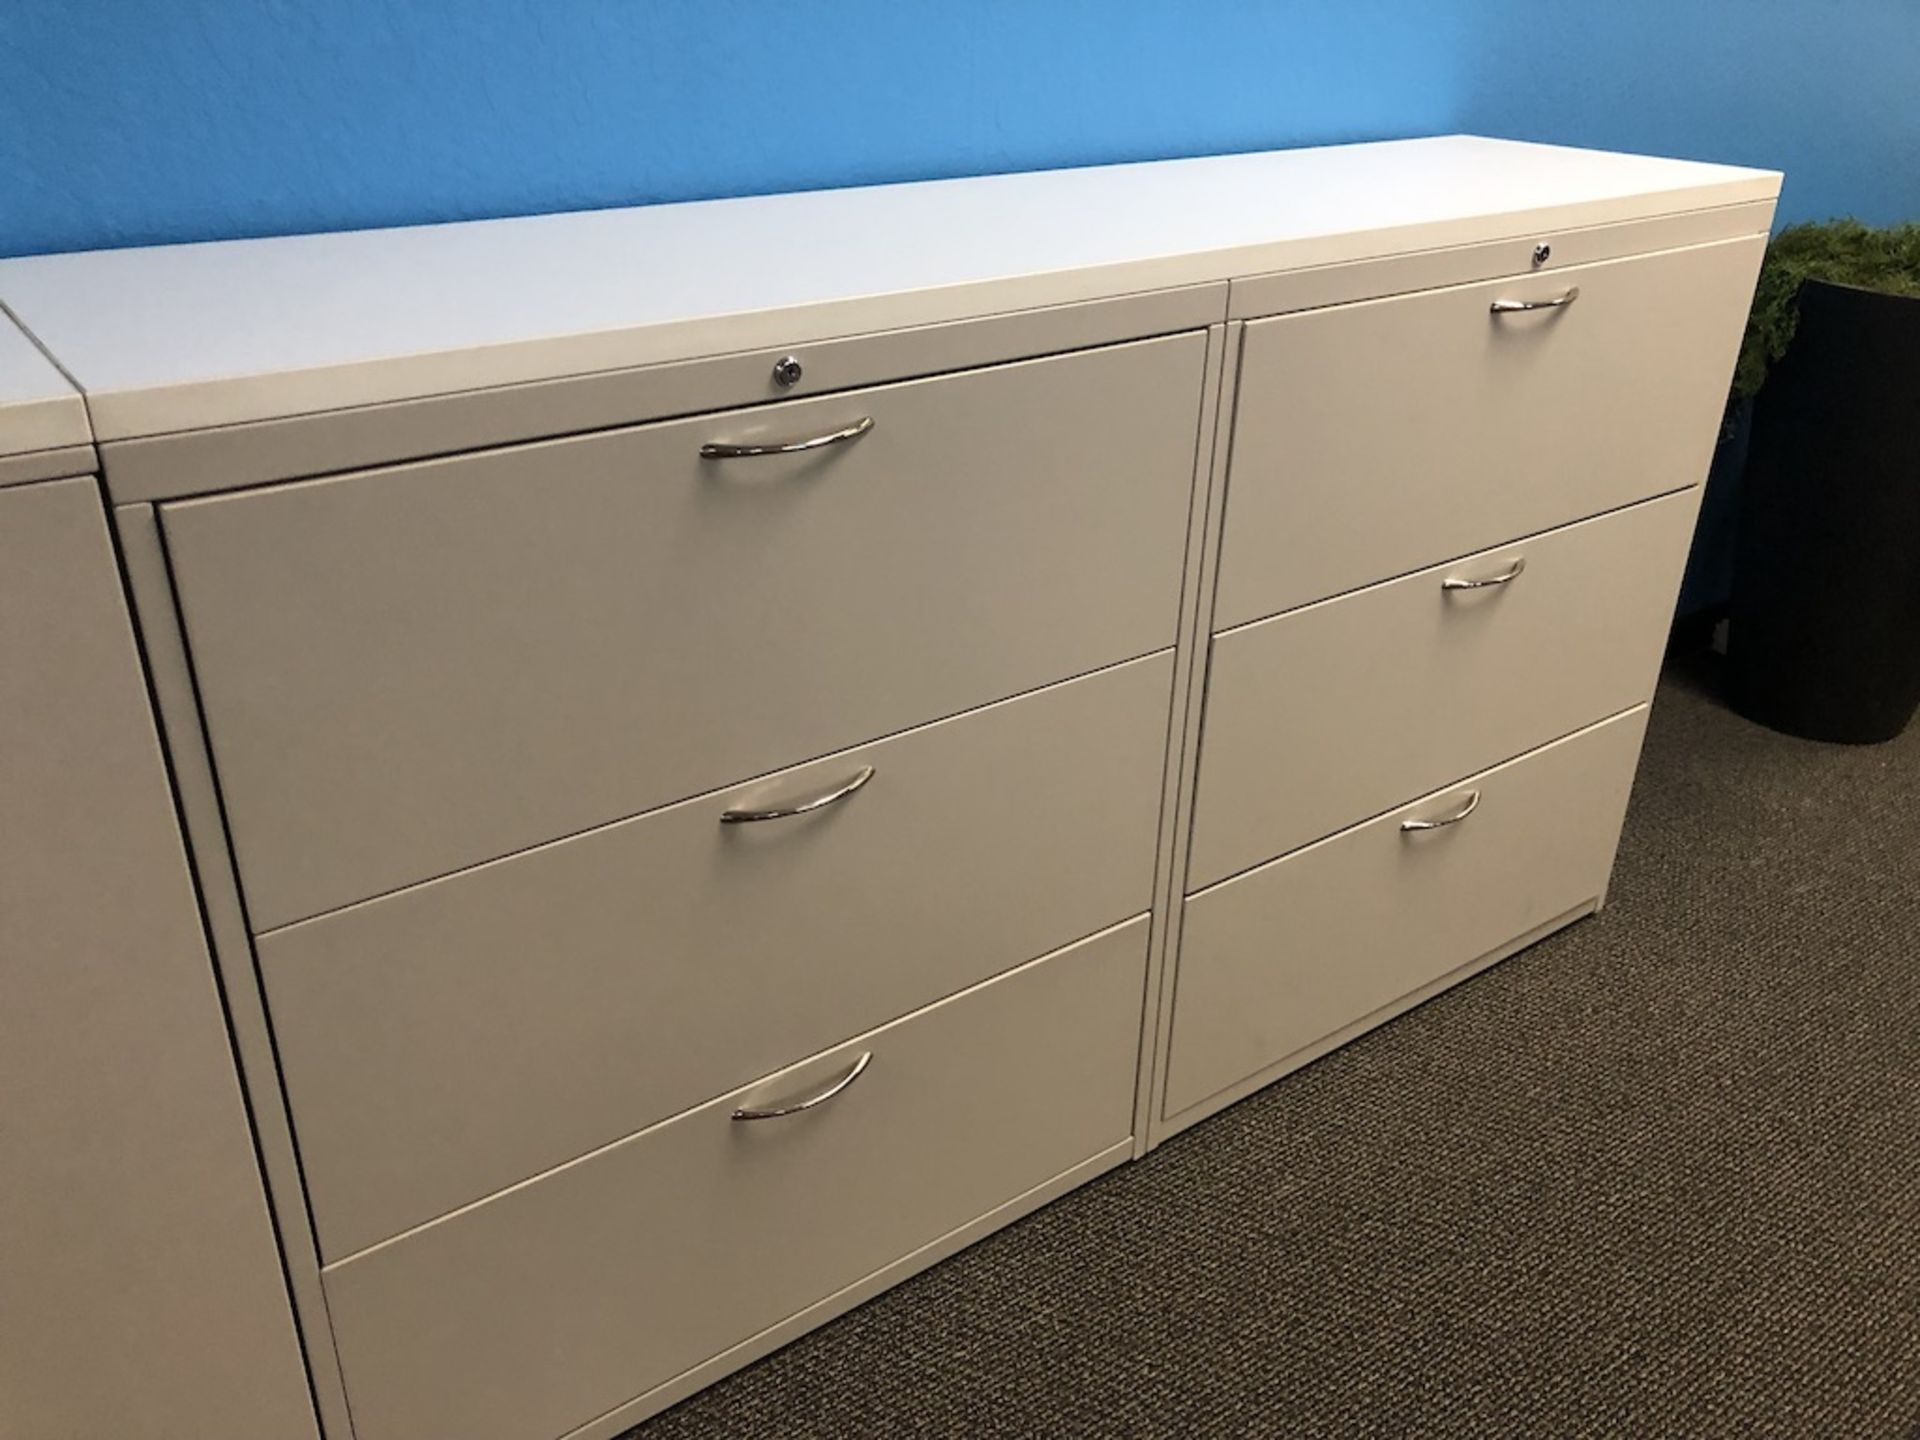 6 DRAWER OFFICE CABINET 6FT L X 18IN W X 41IN H   SCHNEIDER ELECTRIC- 6611 PRESTON AVE SUITE A - Image 4 of 4